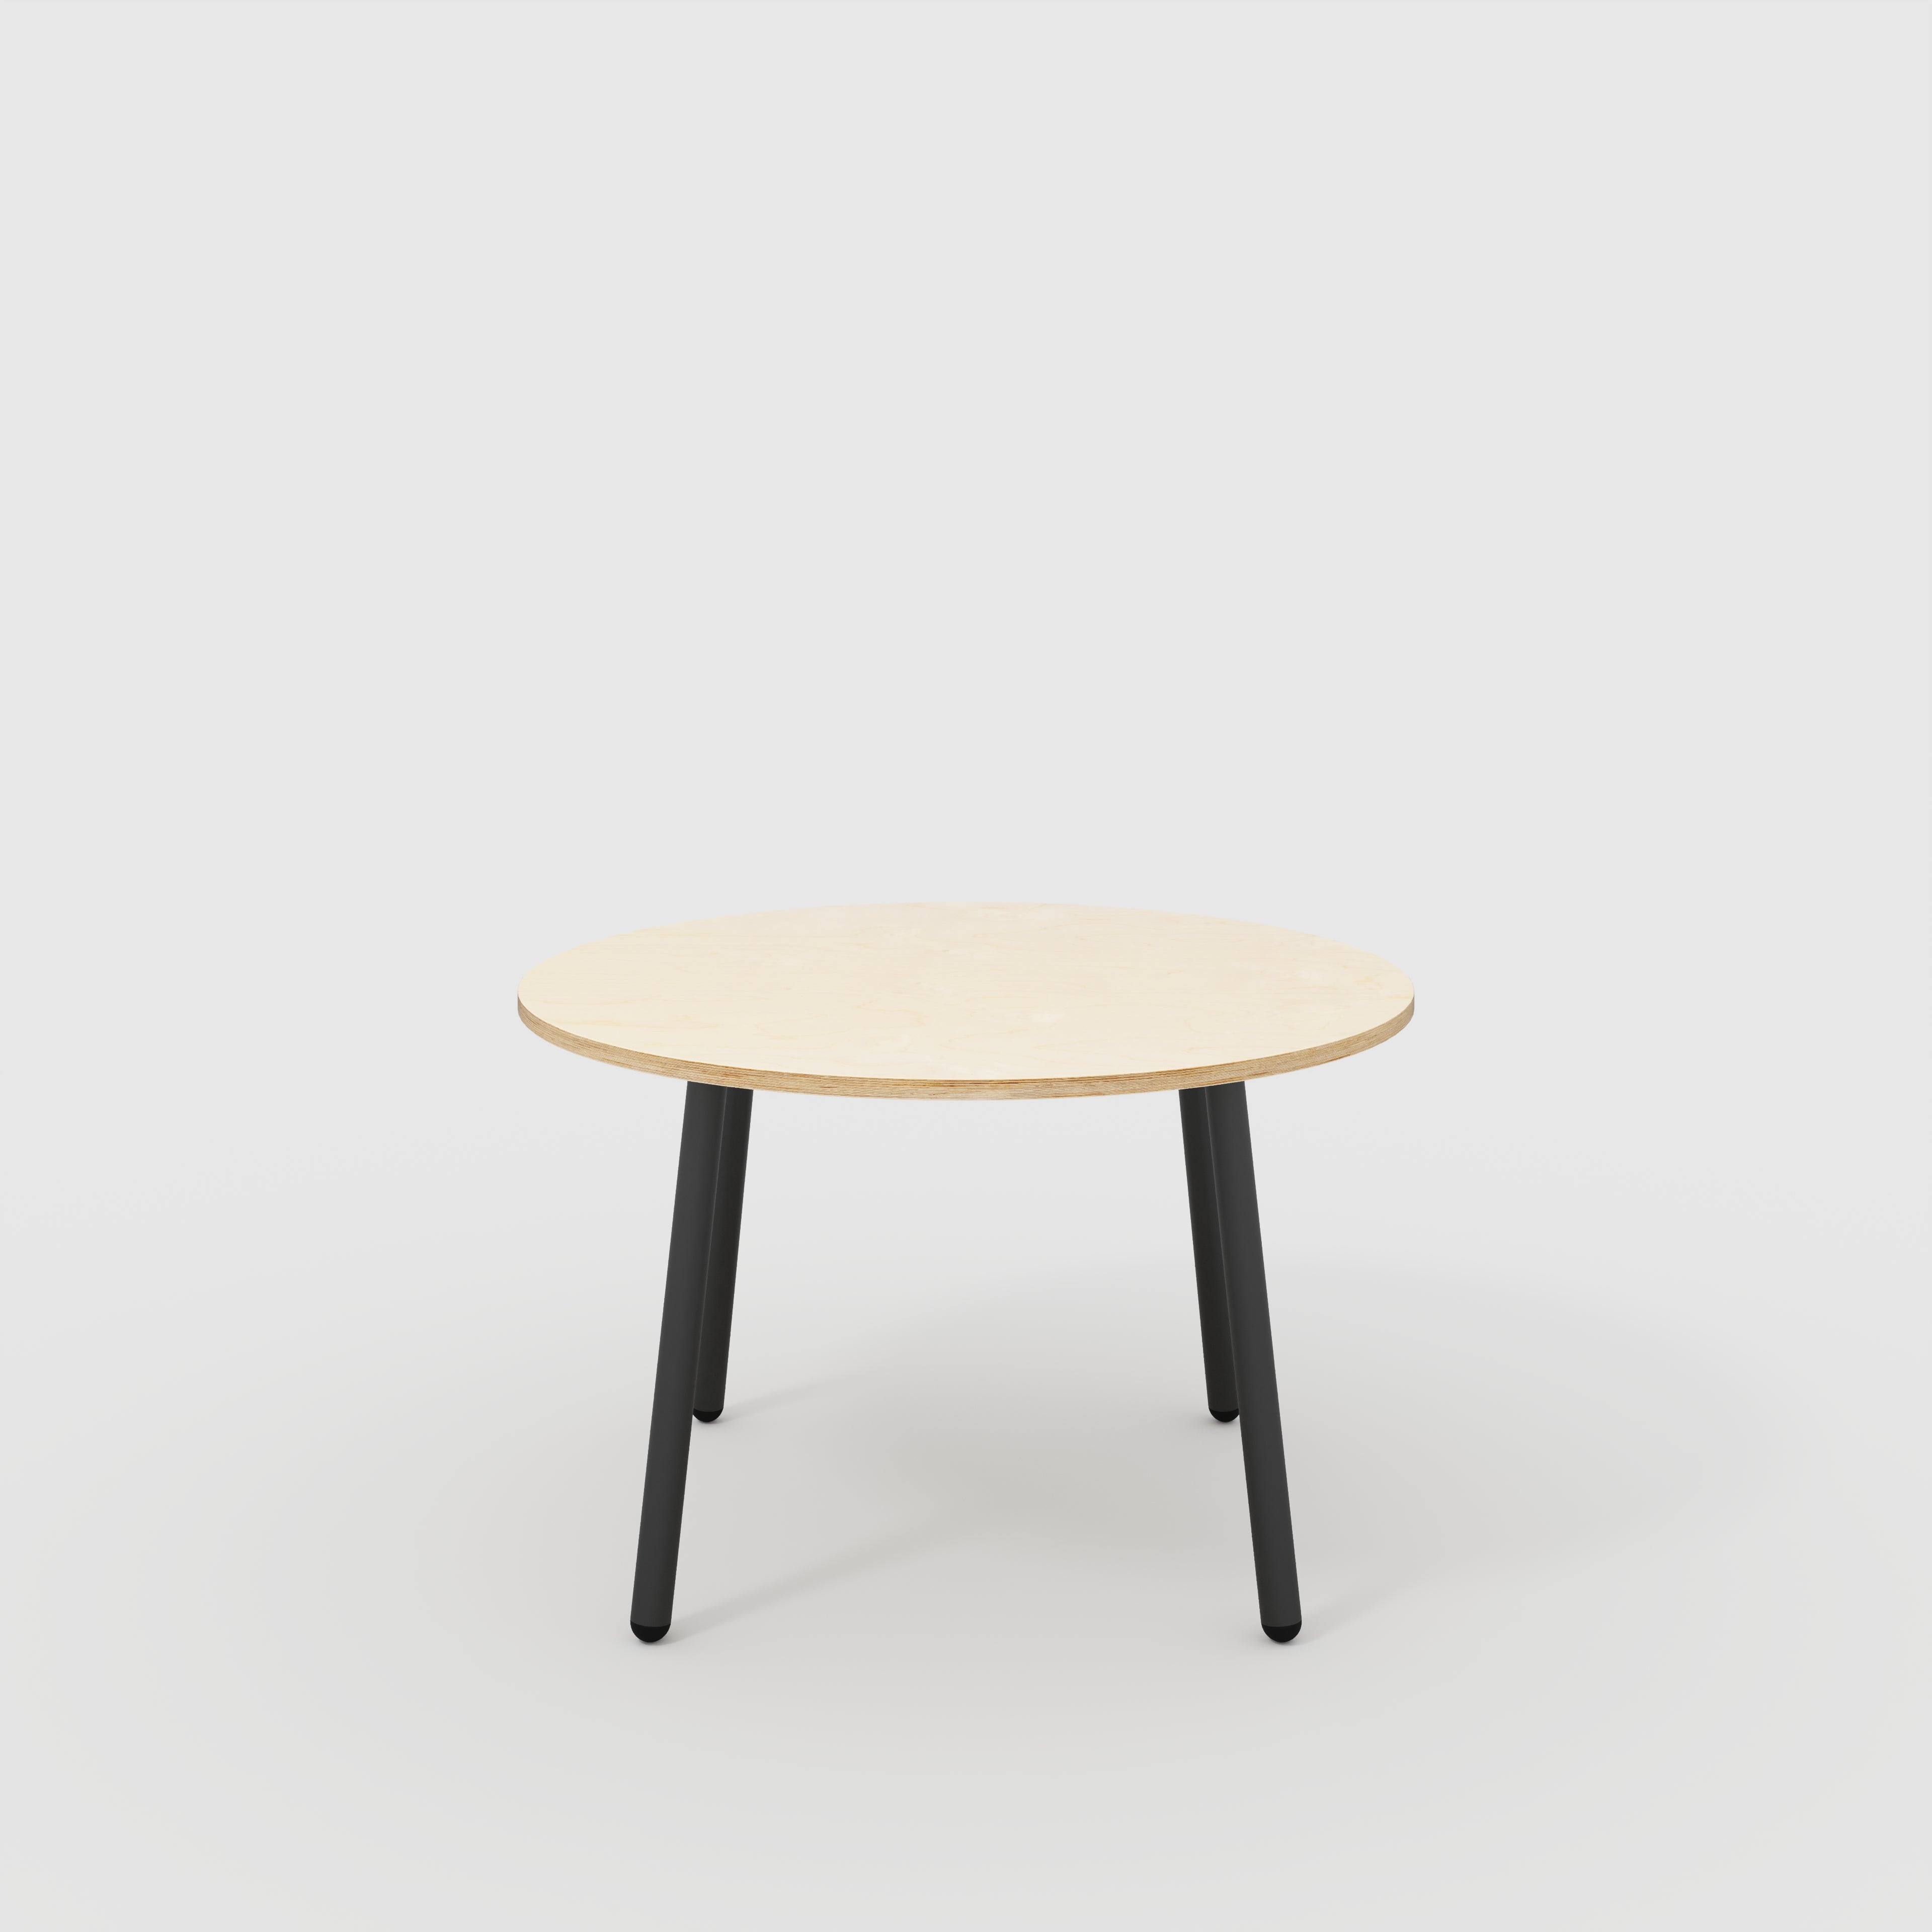 Round Table with Black Round Single Pin Legs - Plywood Birch - 1200(dia) x 735(h)